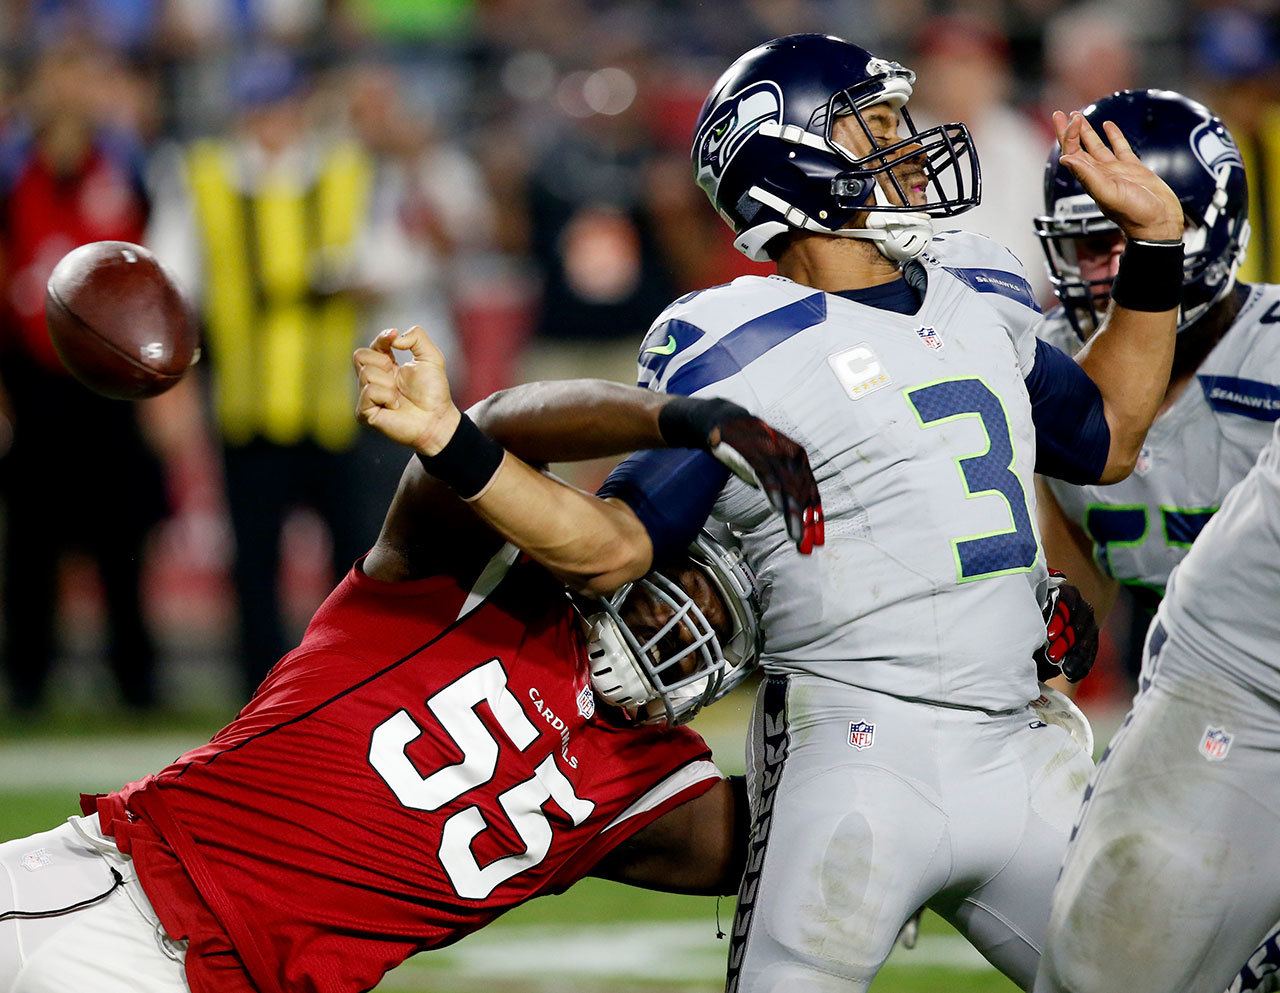 Cardinals linebacker Chandler Jones (55) strips the ball from Seahawks quarterback Russell Wilson (3) during the second half of a game Oct. 23 in Glendale, Ariz. (AP Photo/Ross D. Franklin)